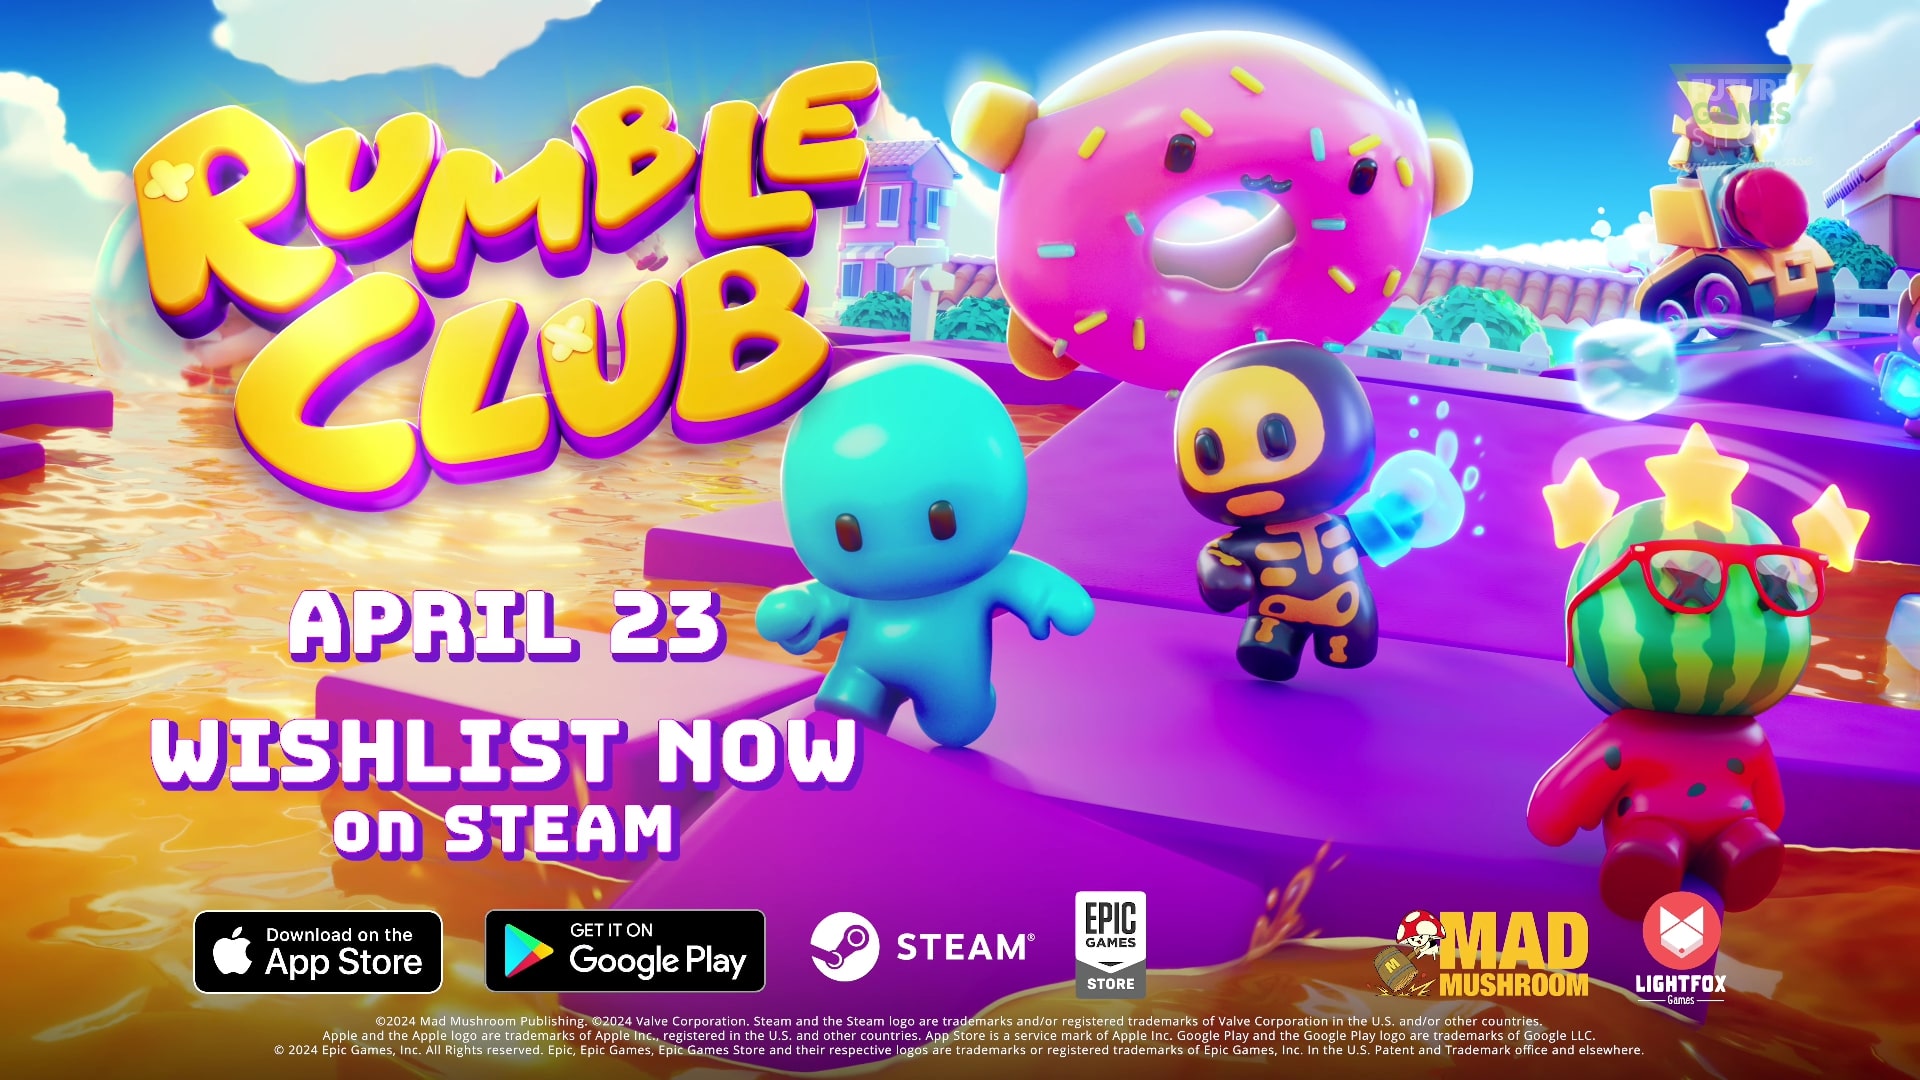 "Rumble Club" Brawler Coming to iOS and Android with Mad Mushroom and Lightfox Games